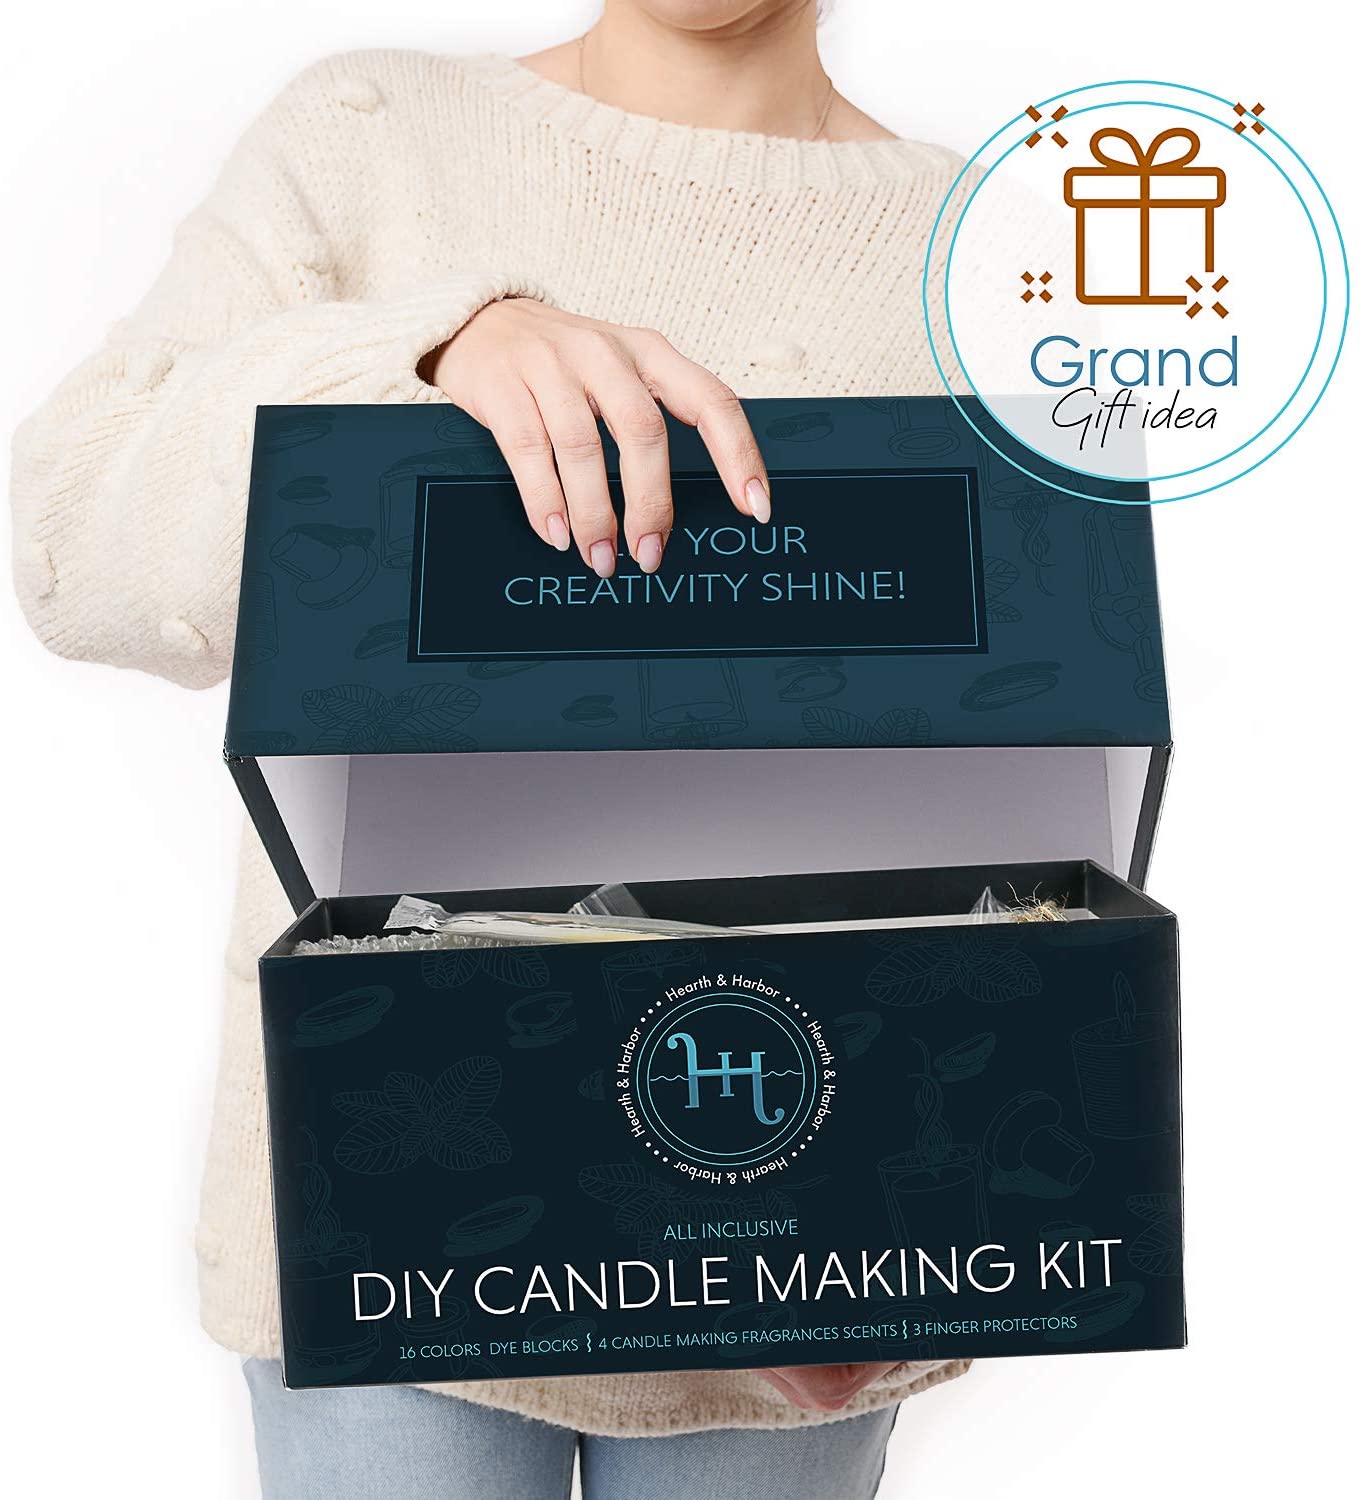 Hearth And Harbor Complete DIY Candle Making Kit Supplies For Adults and  Children